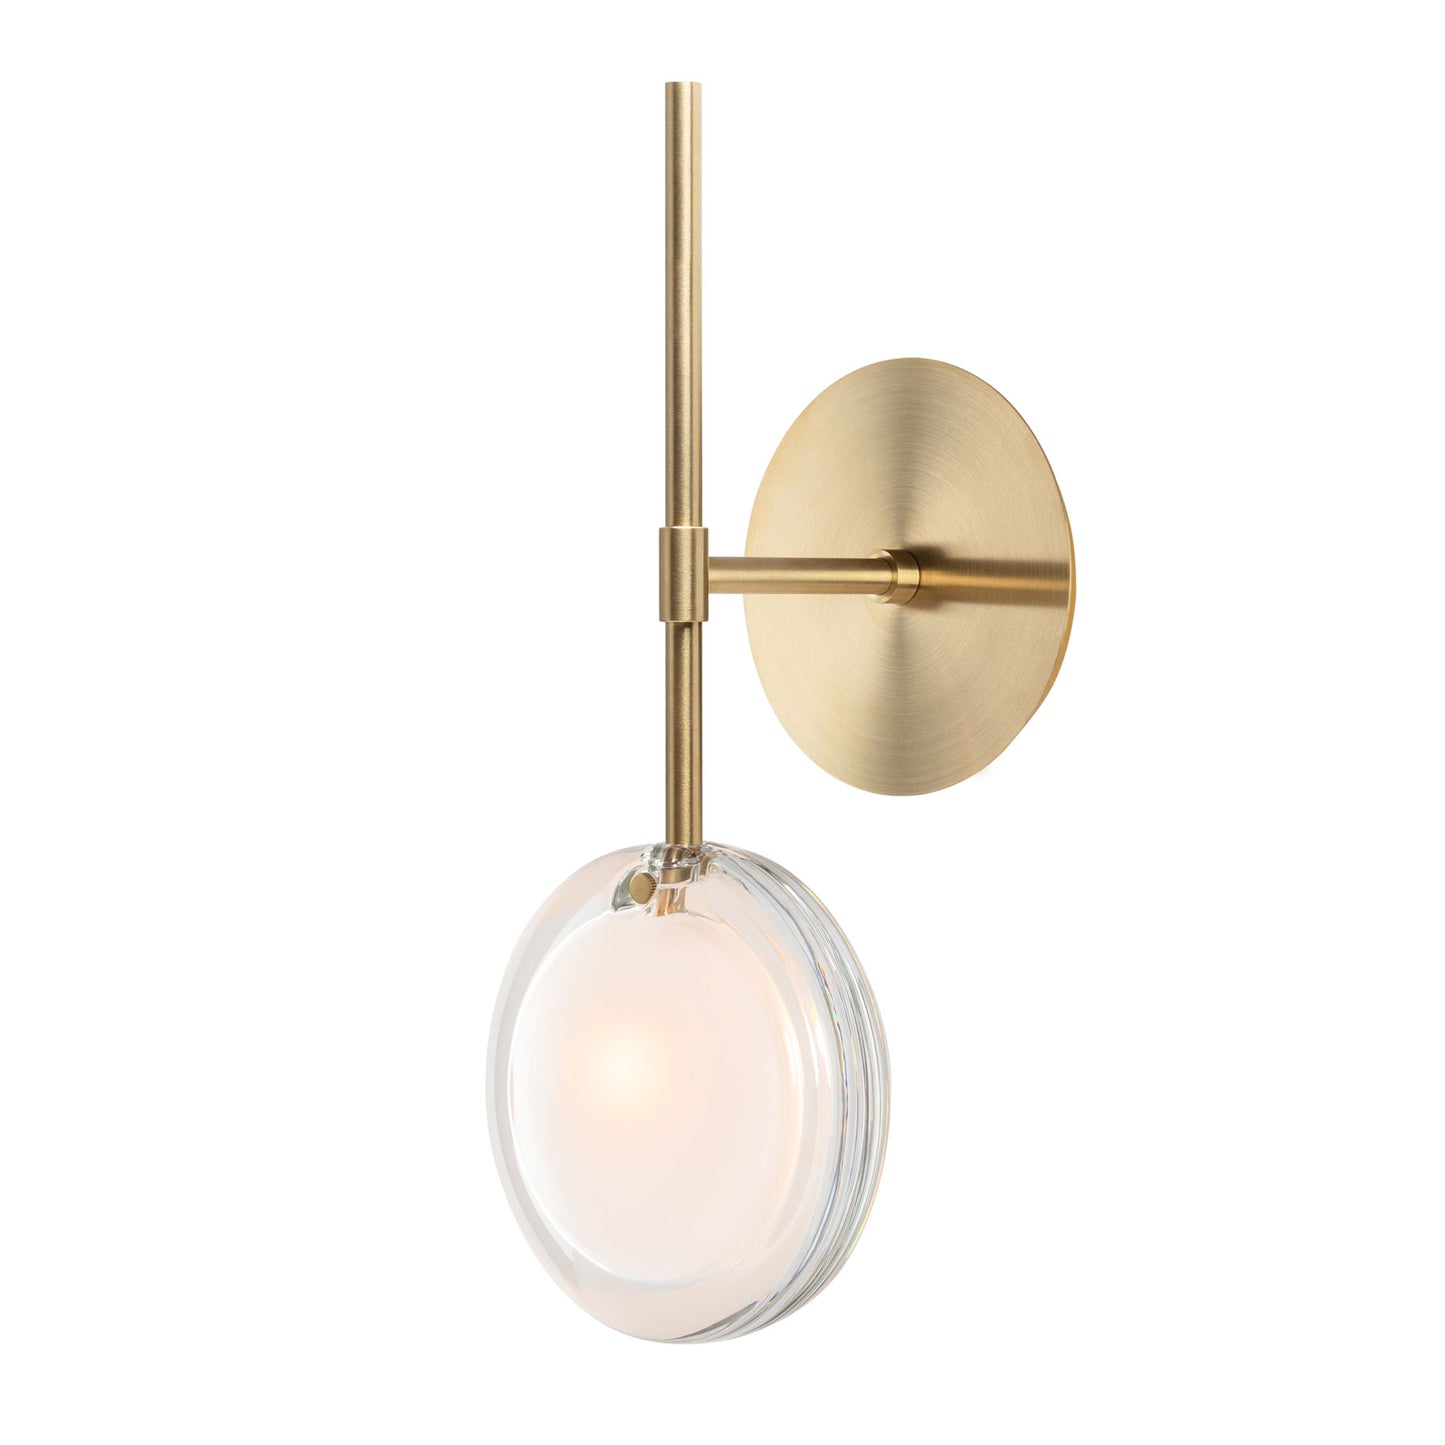 BOMMA - LENS WALL SCONCE - from $1,480.00